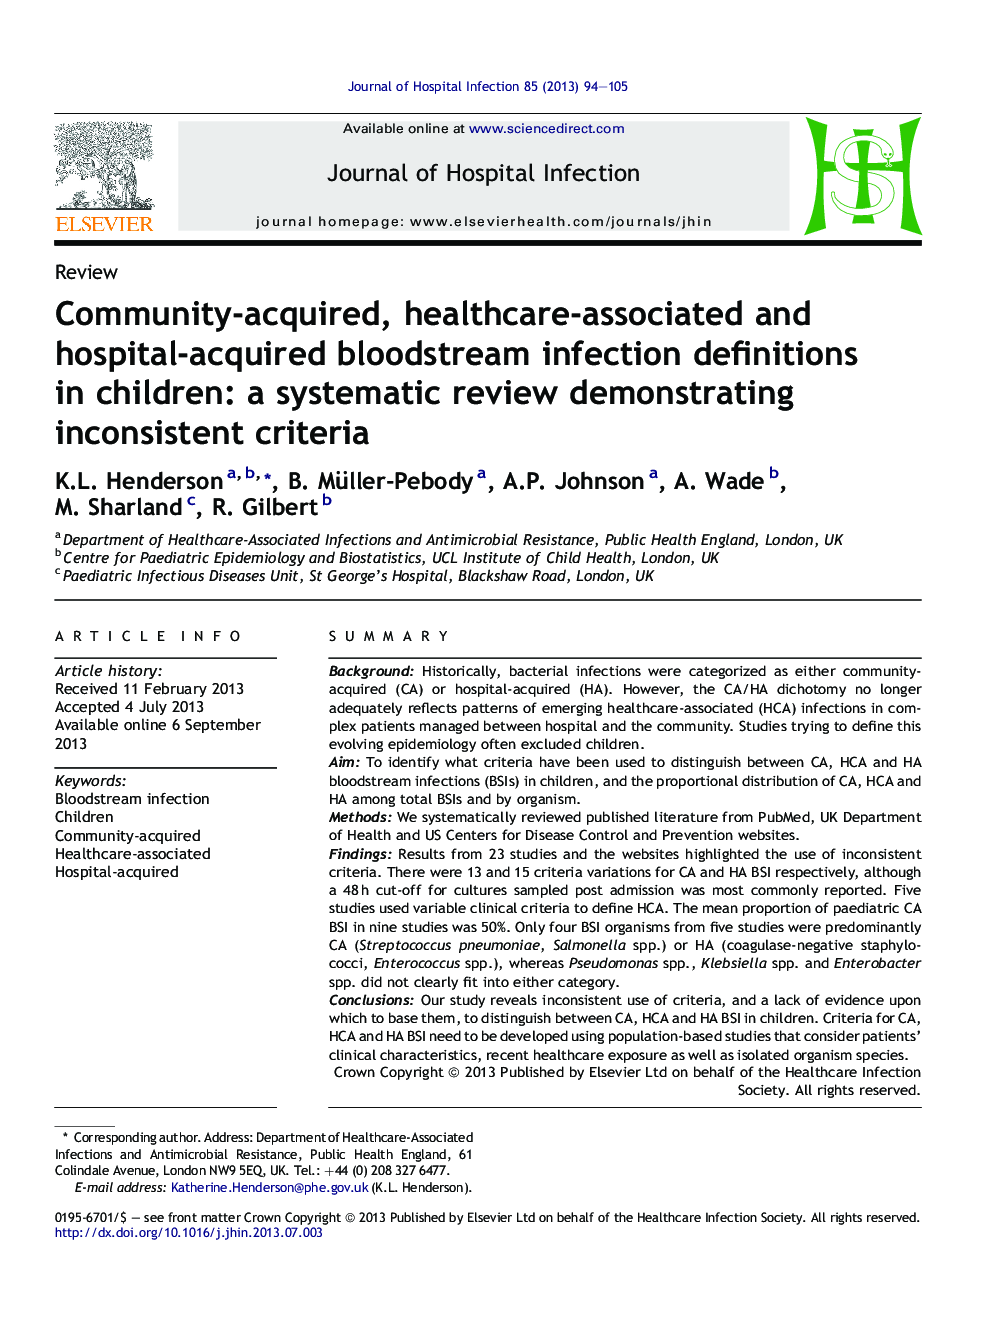 Community-acquired, healthcare-associated and hospital-acquired bloodstream infection definitions in children: a systematic review demonstrating inconsistent criteria